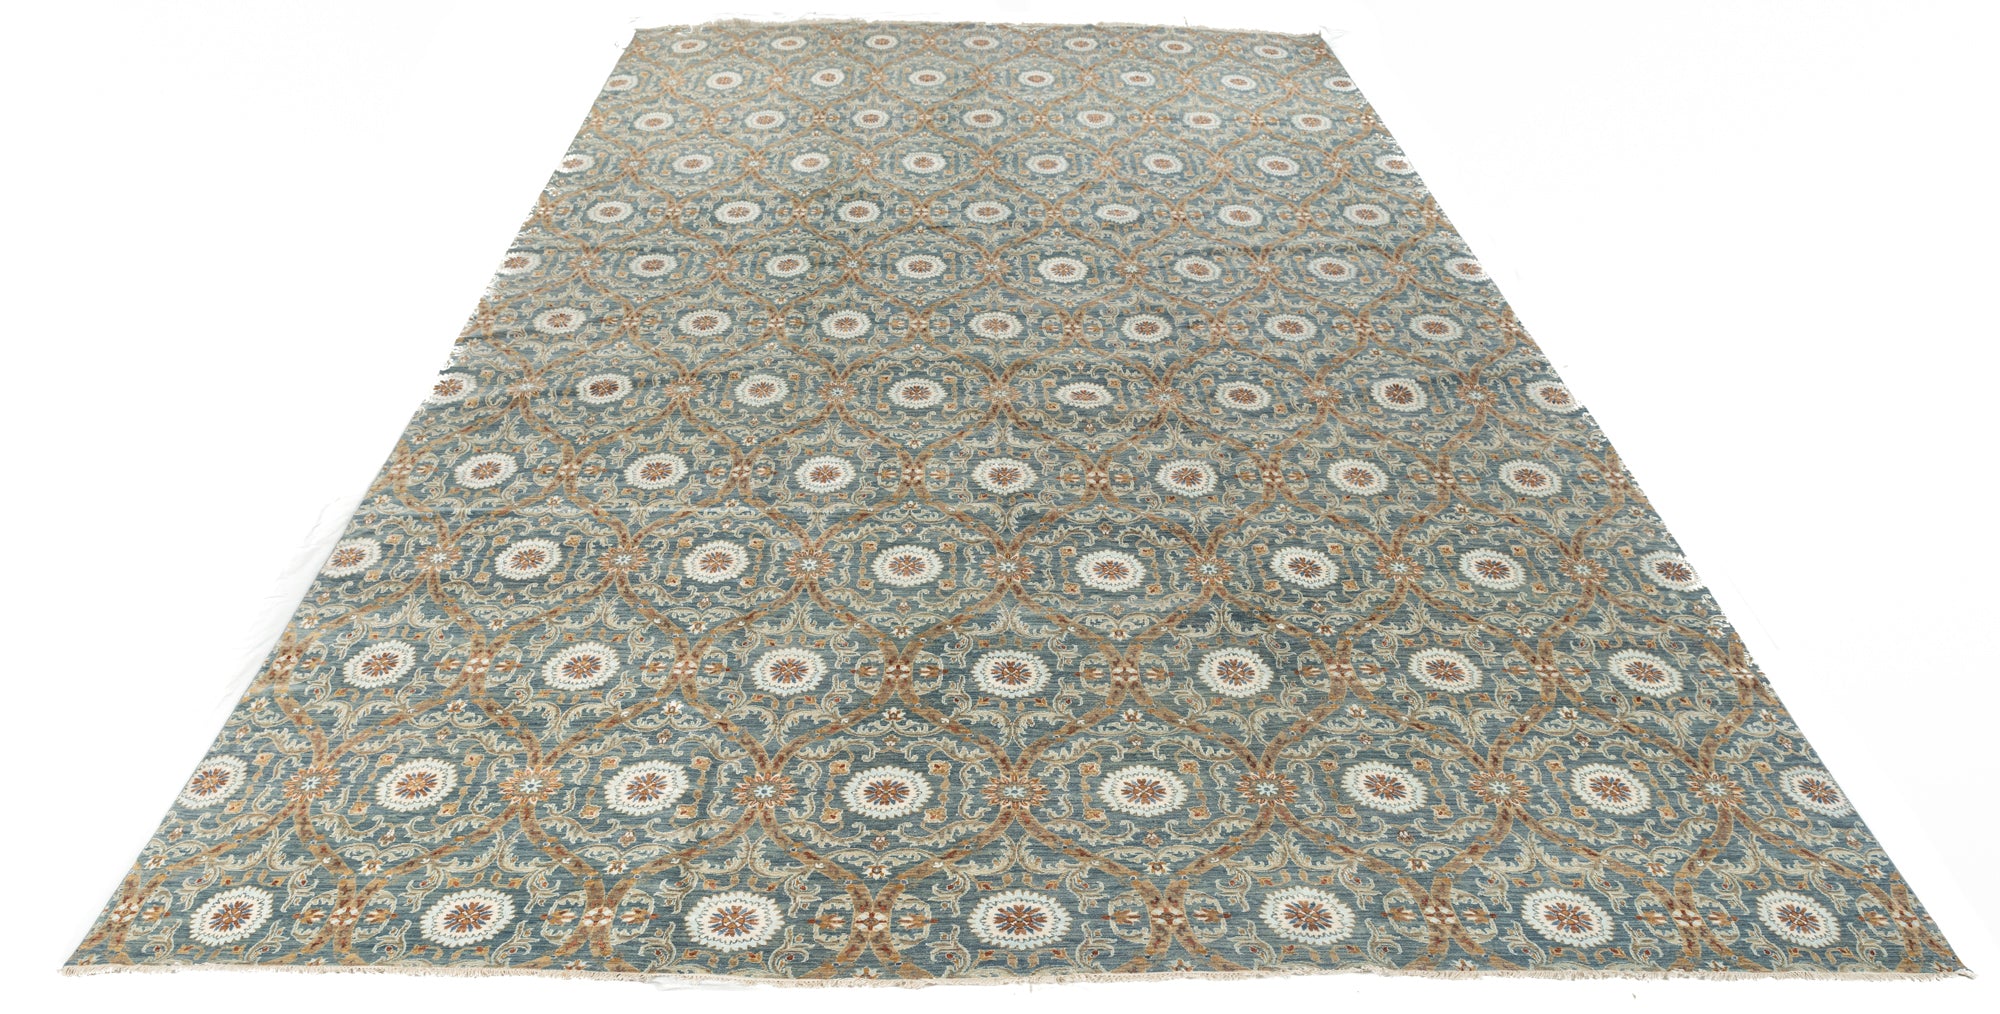 New Indian Contemporary Design Rug <br> 13'3 x 20'2